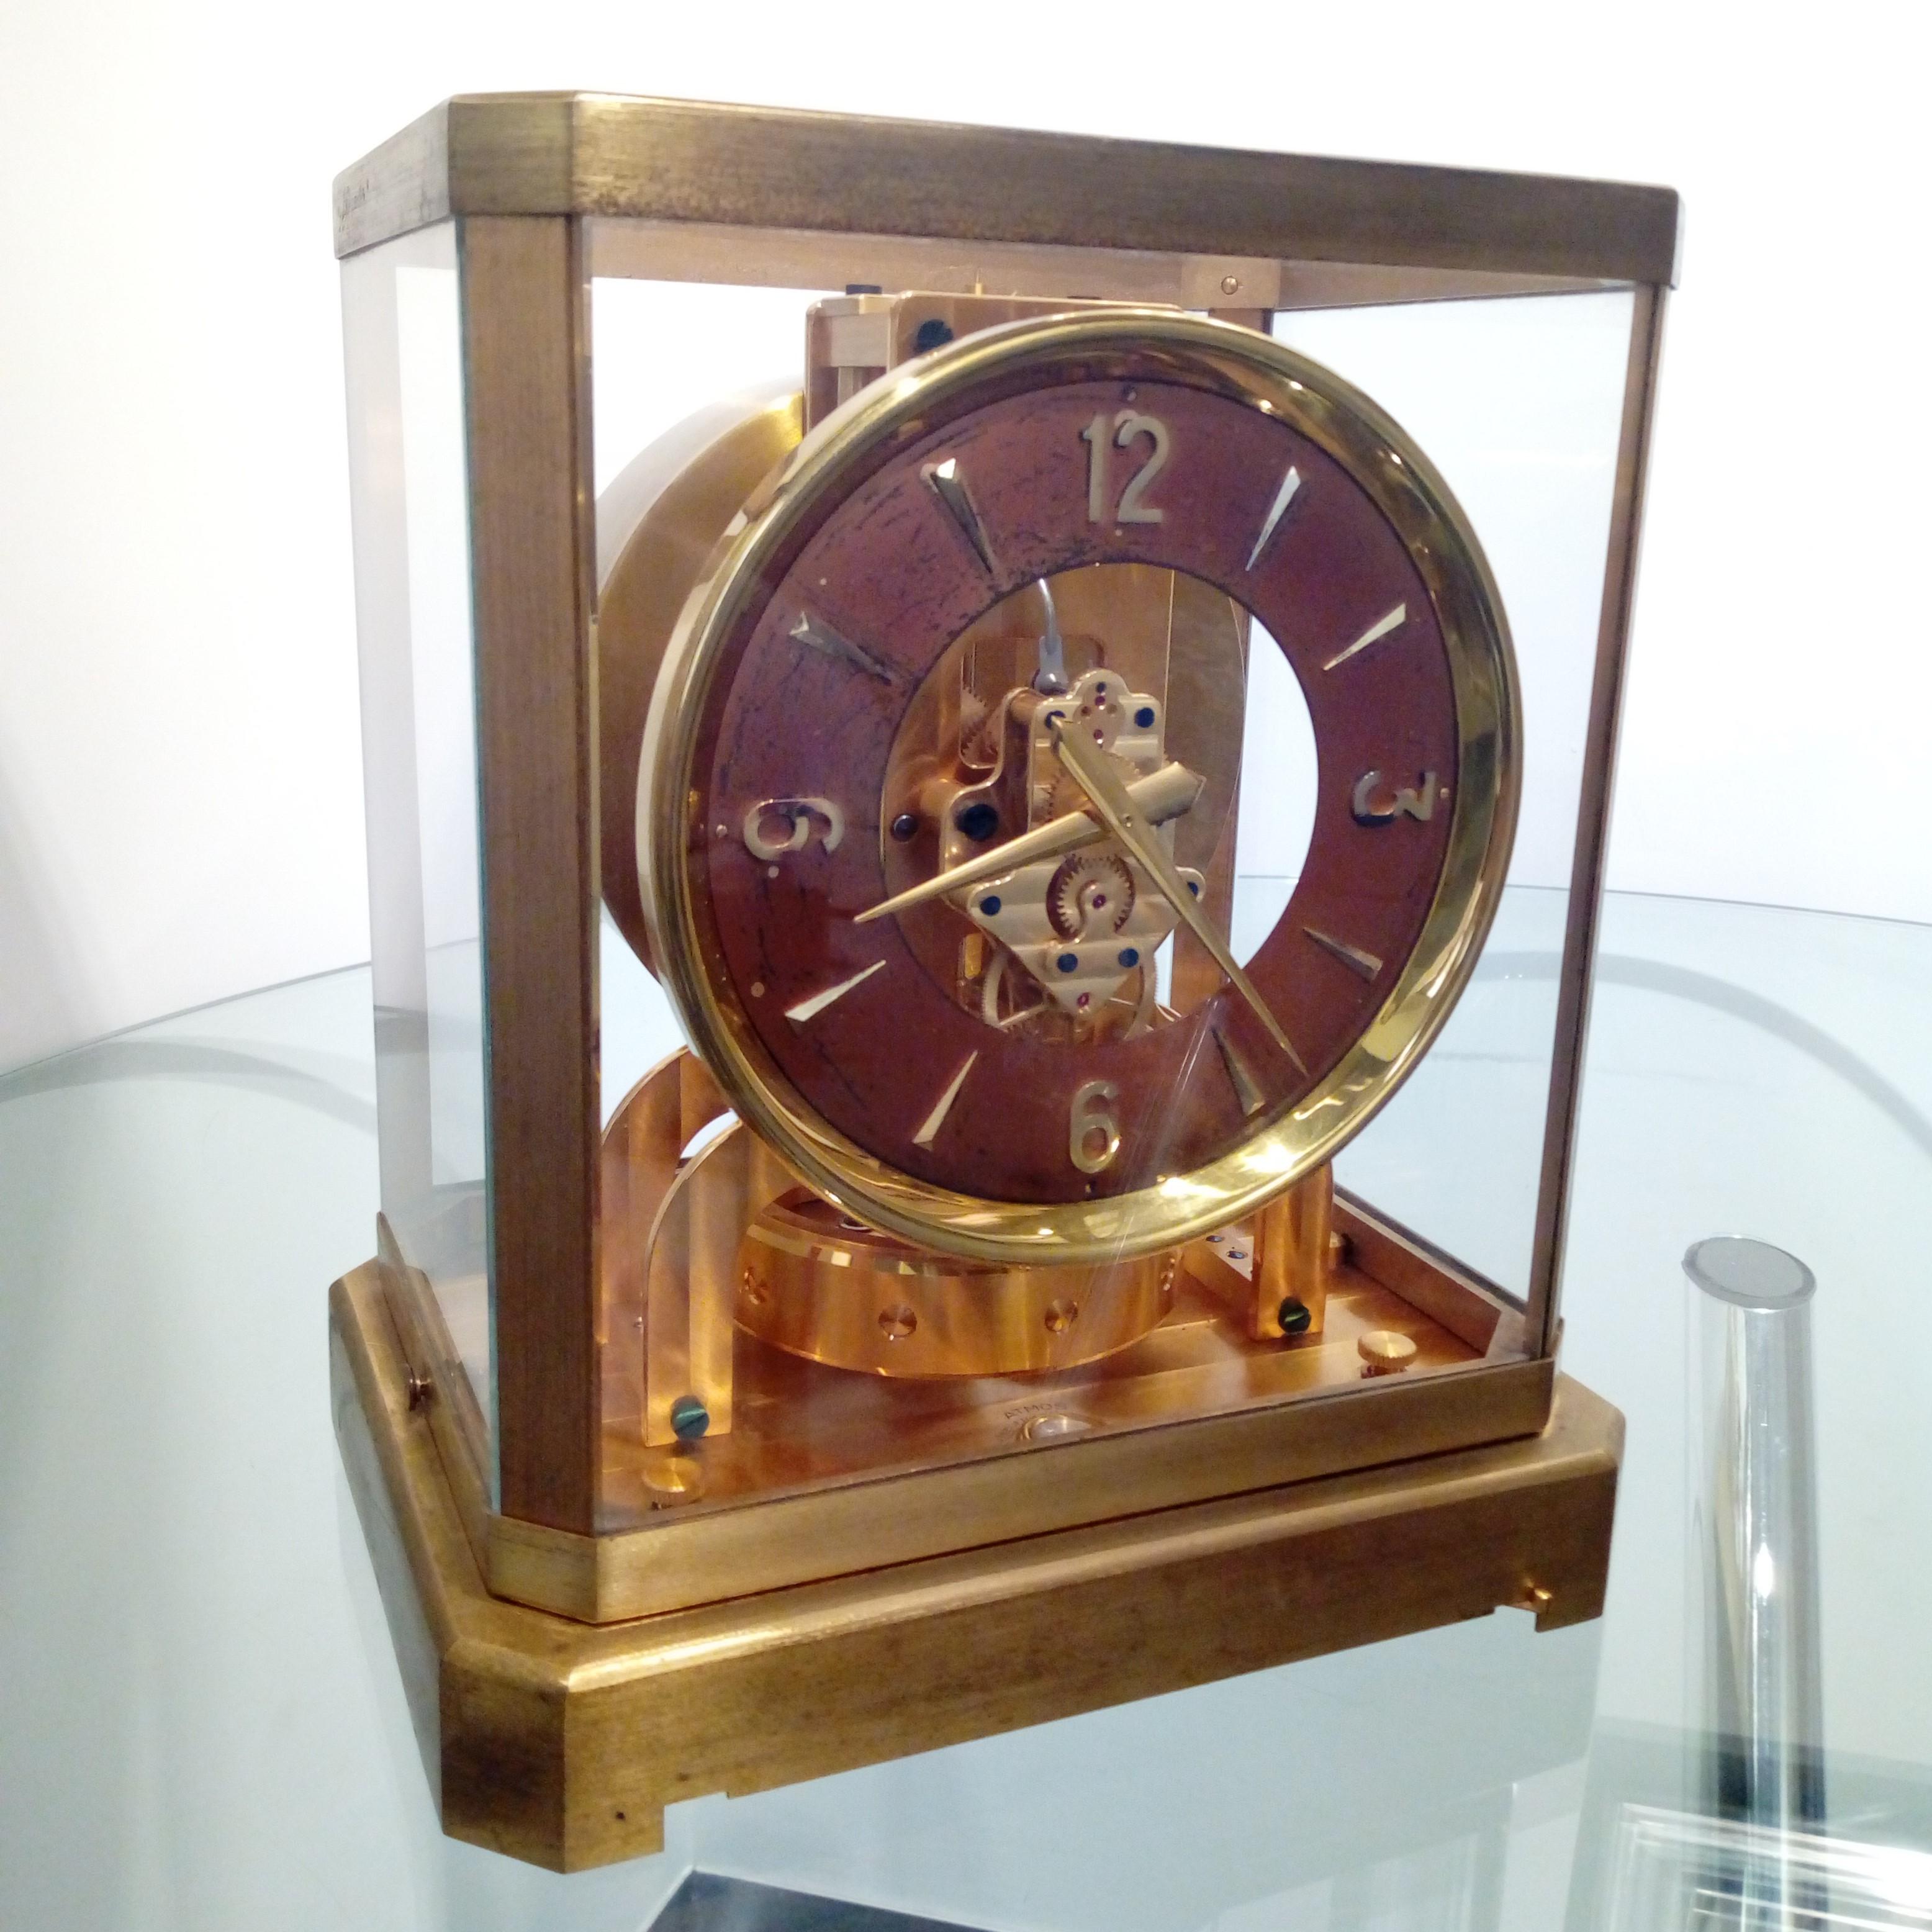 Jaeger-LeCoultre. 

Atmos table clock, original 1950s, made of brass and steel. 

19 x 23 x 15 cm. 

Caliber 532. Functioning.